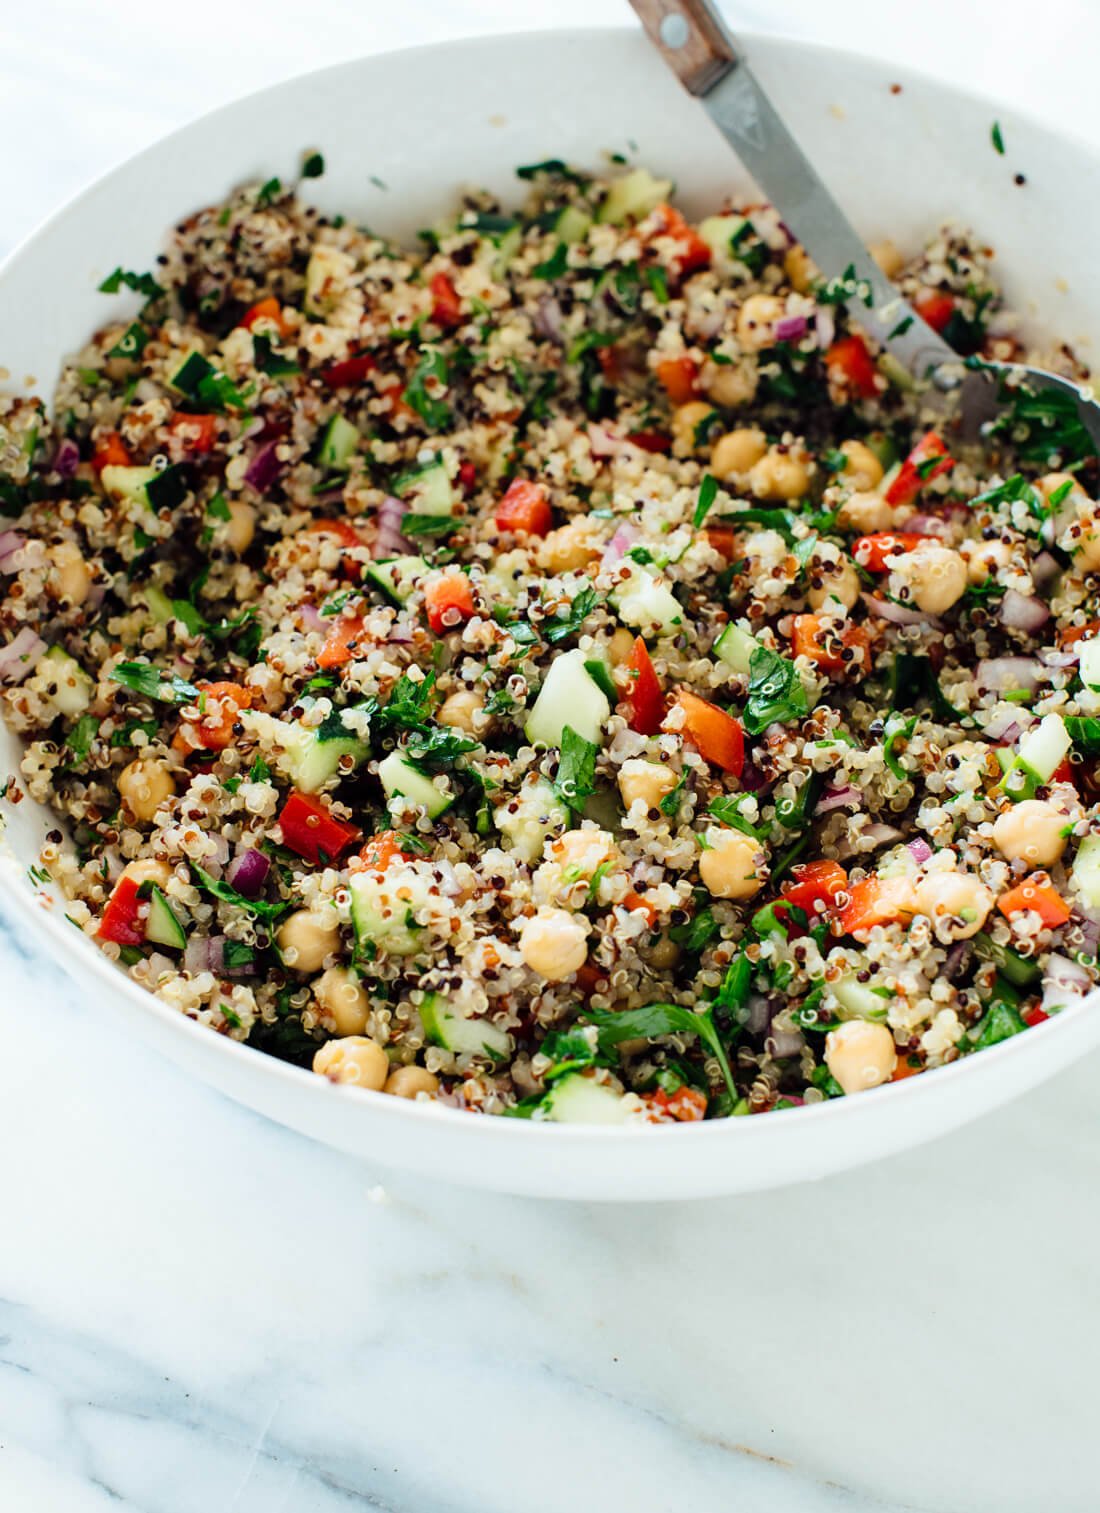 II. Benefits of Quinoa in Salads and Bowls